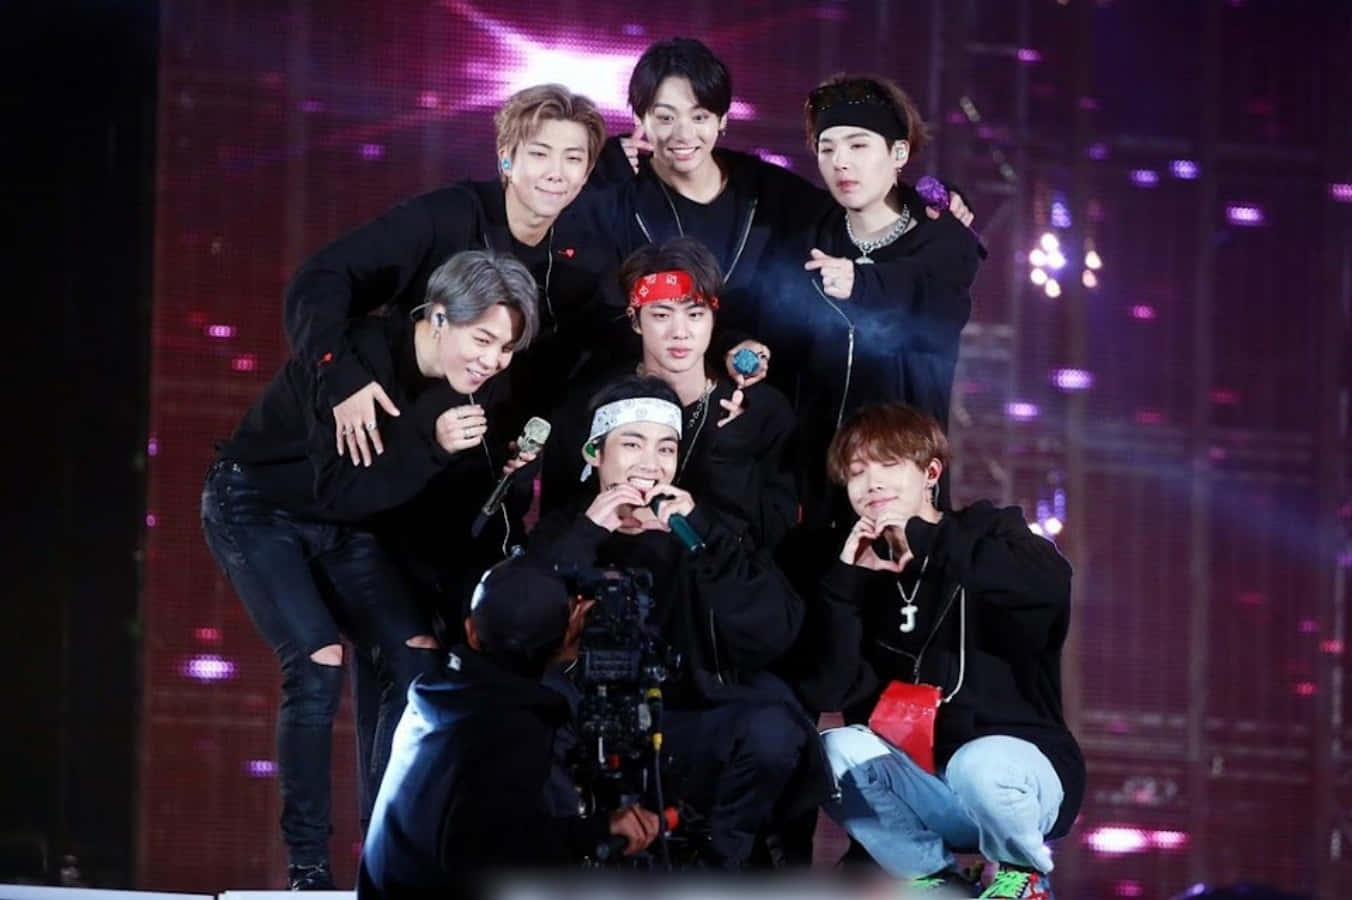 Fans of the K-Pop group BTS come together for a rowdy and passionate concert.